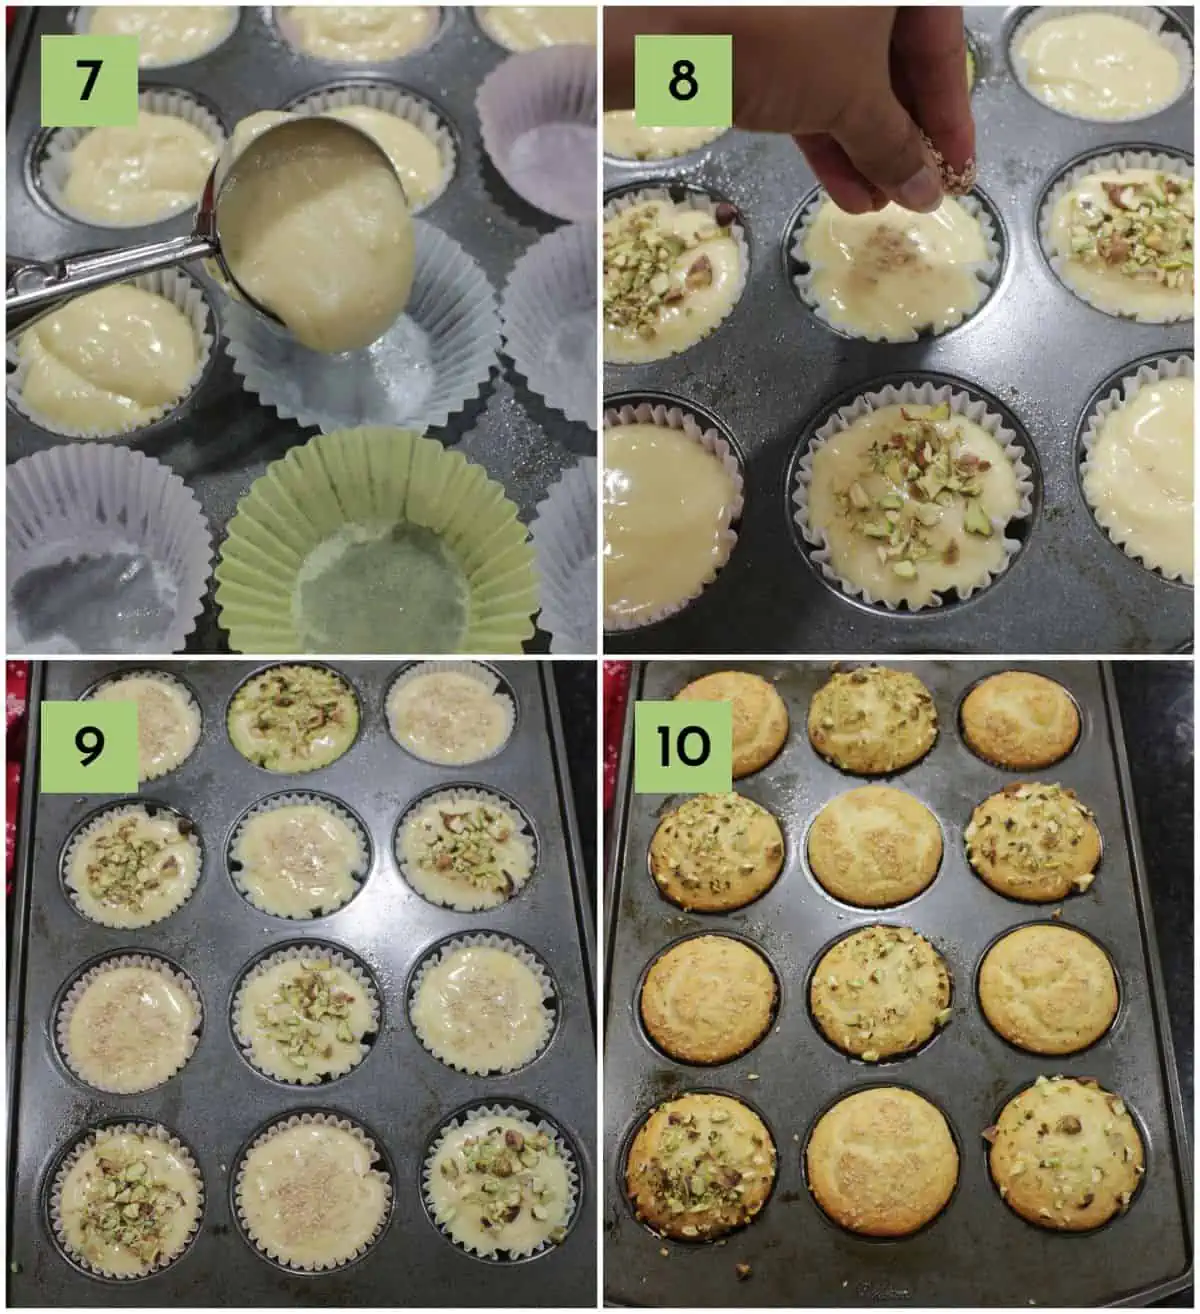 Process shot showing how to pour Persian cardamom muffin batter in tins and bake.